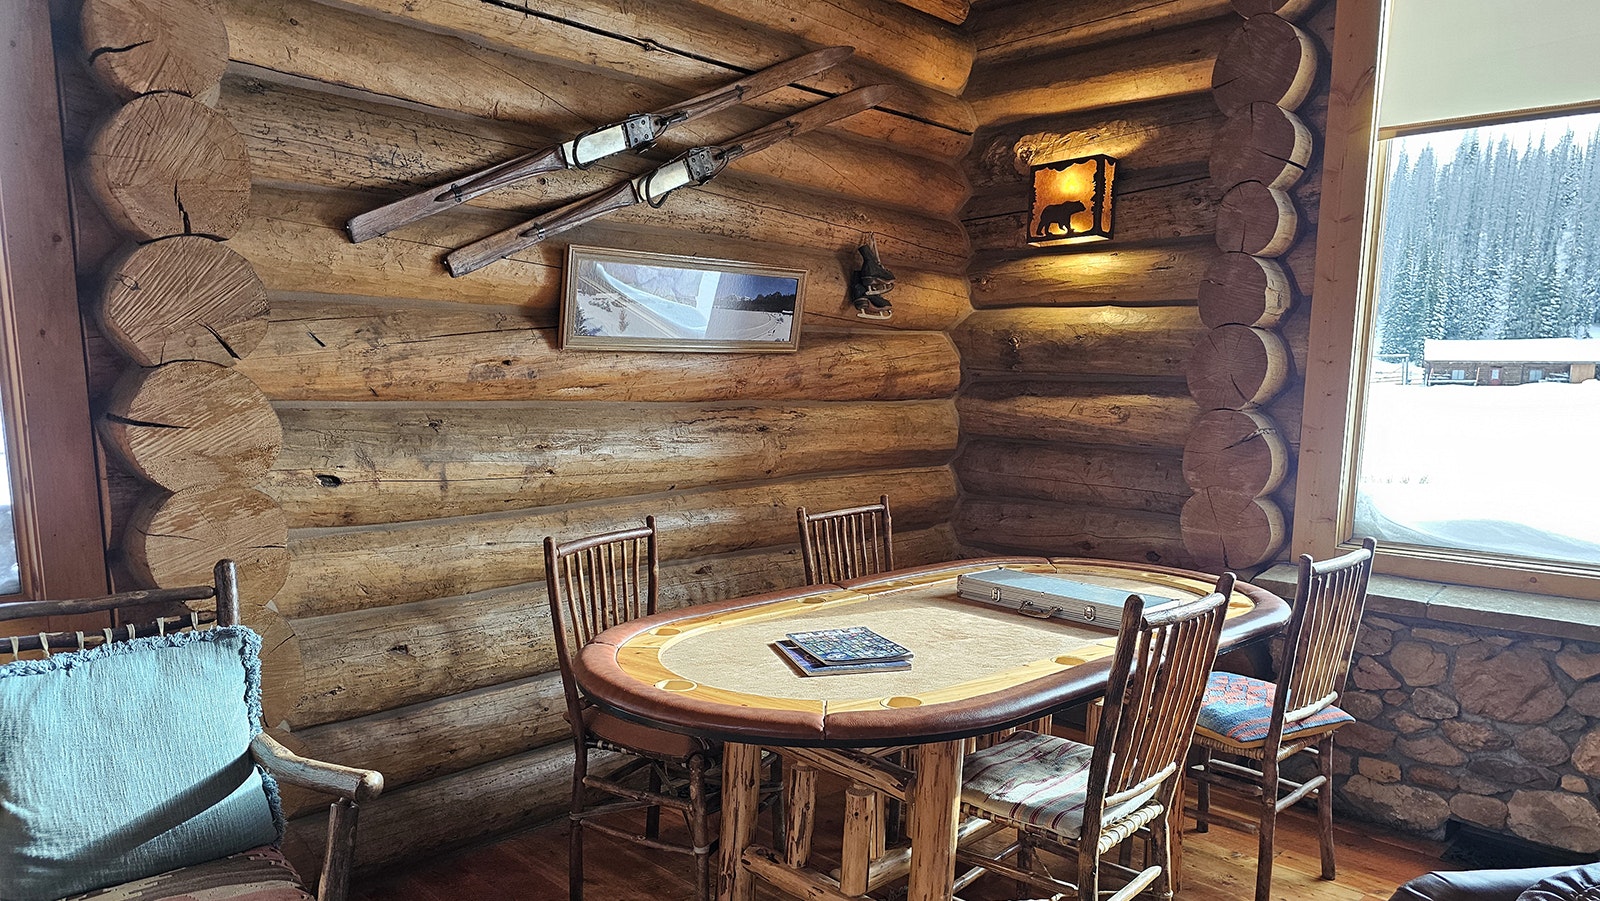 Artifacts from winters gone by as well as artwork adorn the rustic hewn log cabin walls.